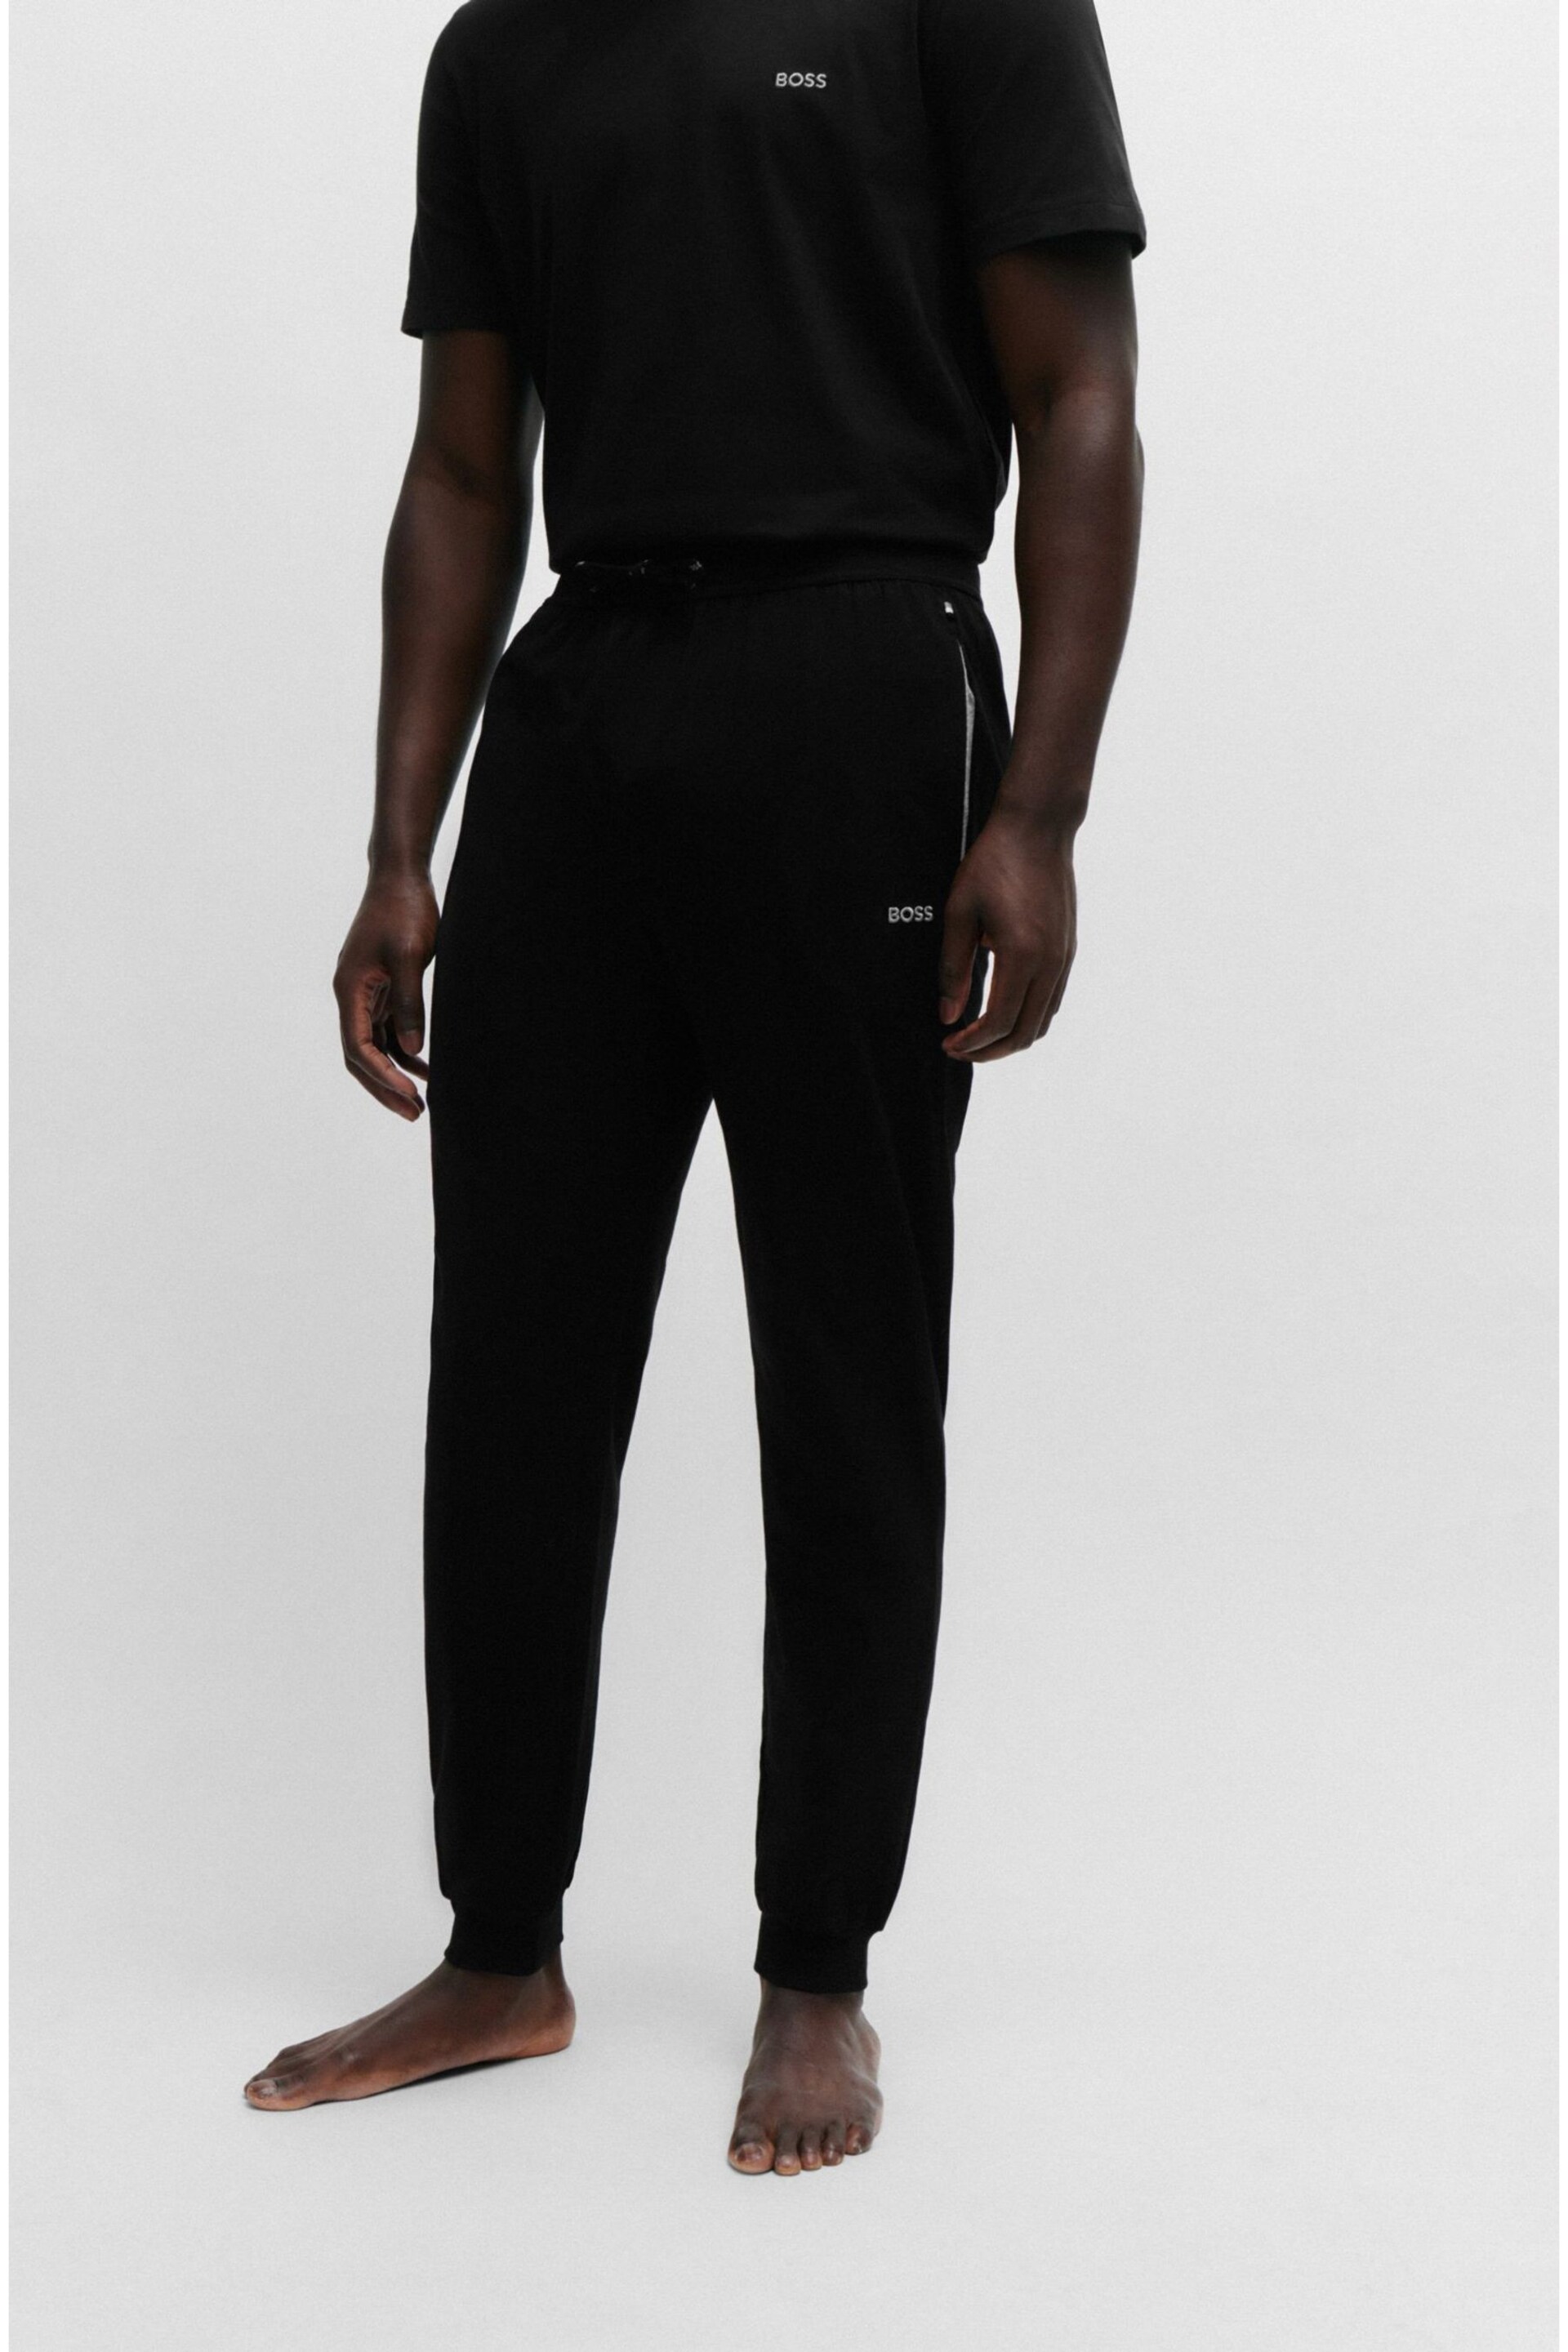 BOSS Black Logo-Detail Joggers In Stretch Cotton - Image 1 of 5